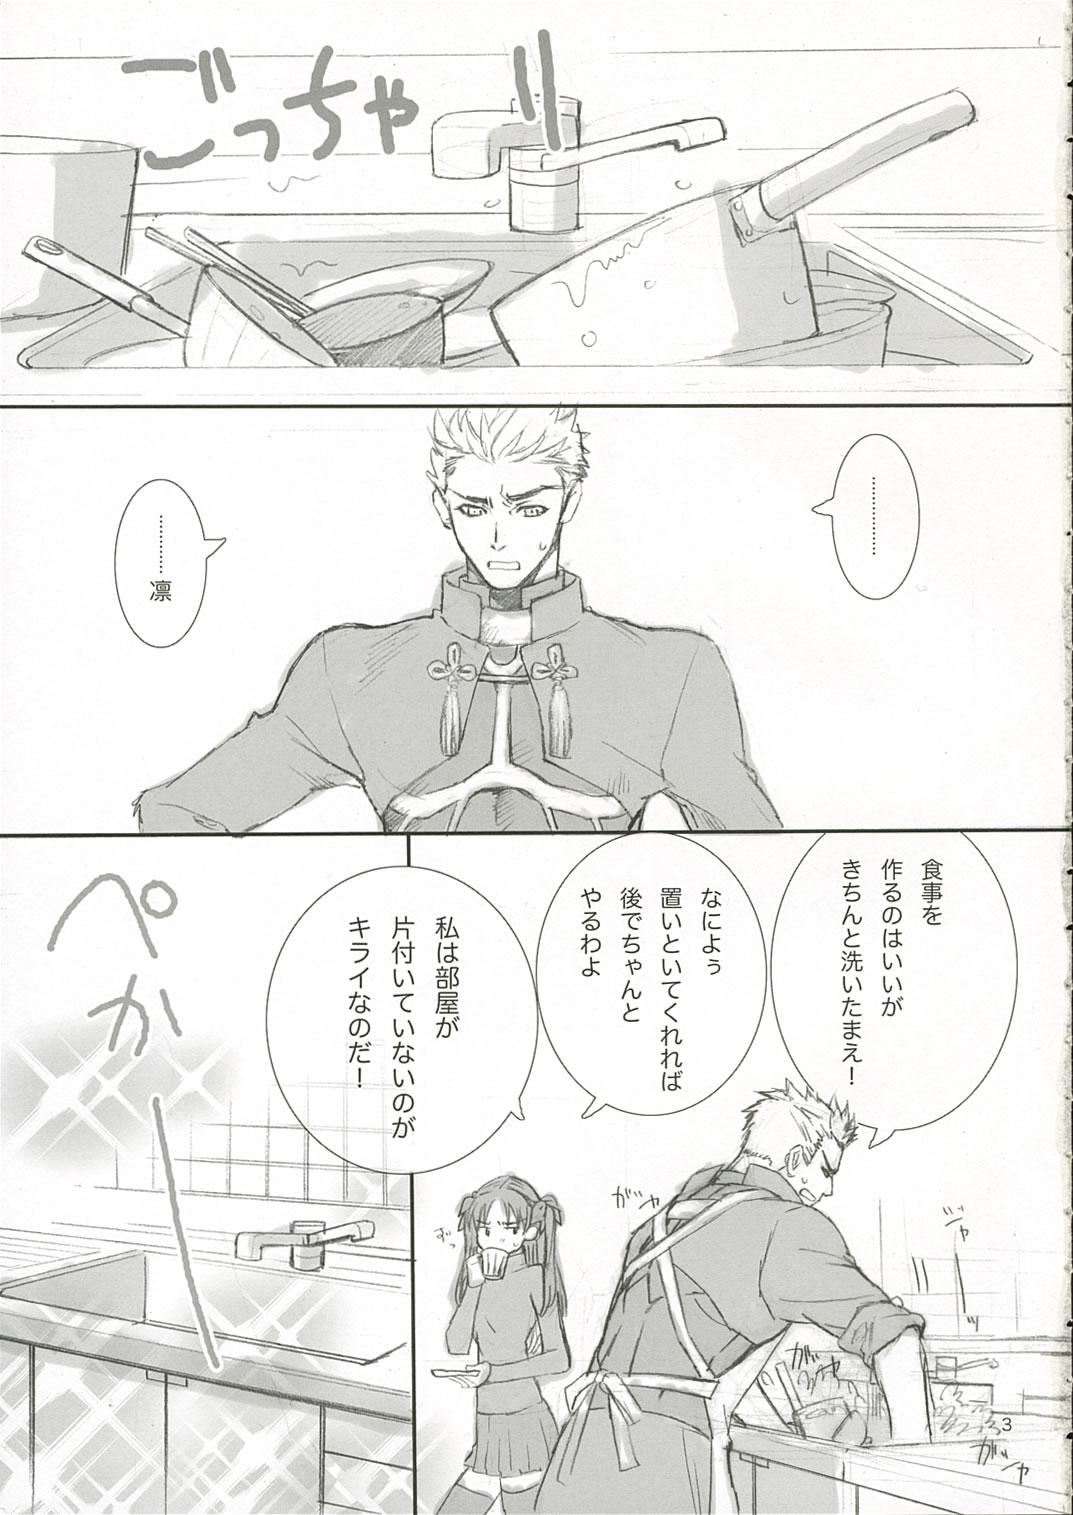 This Candy - Fate stay night Hot - Page 2